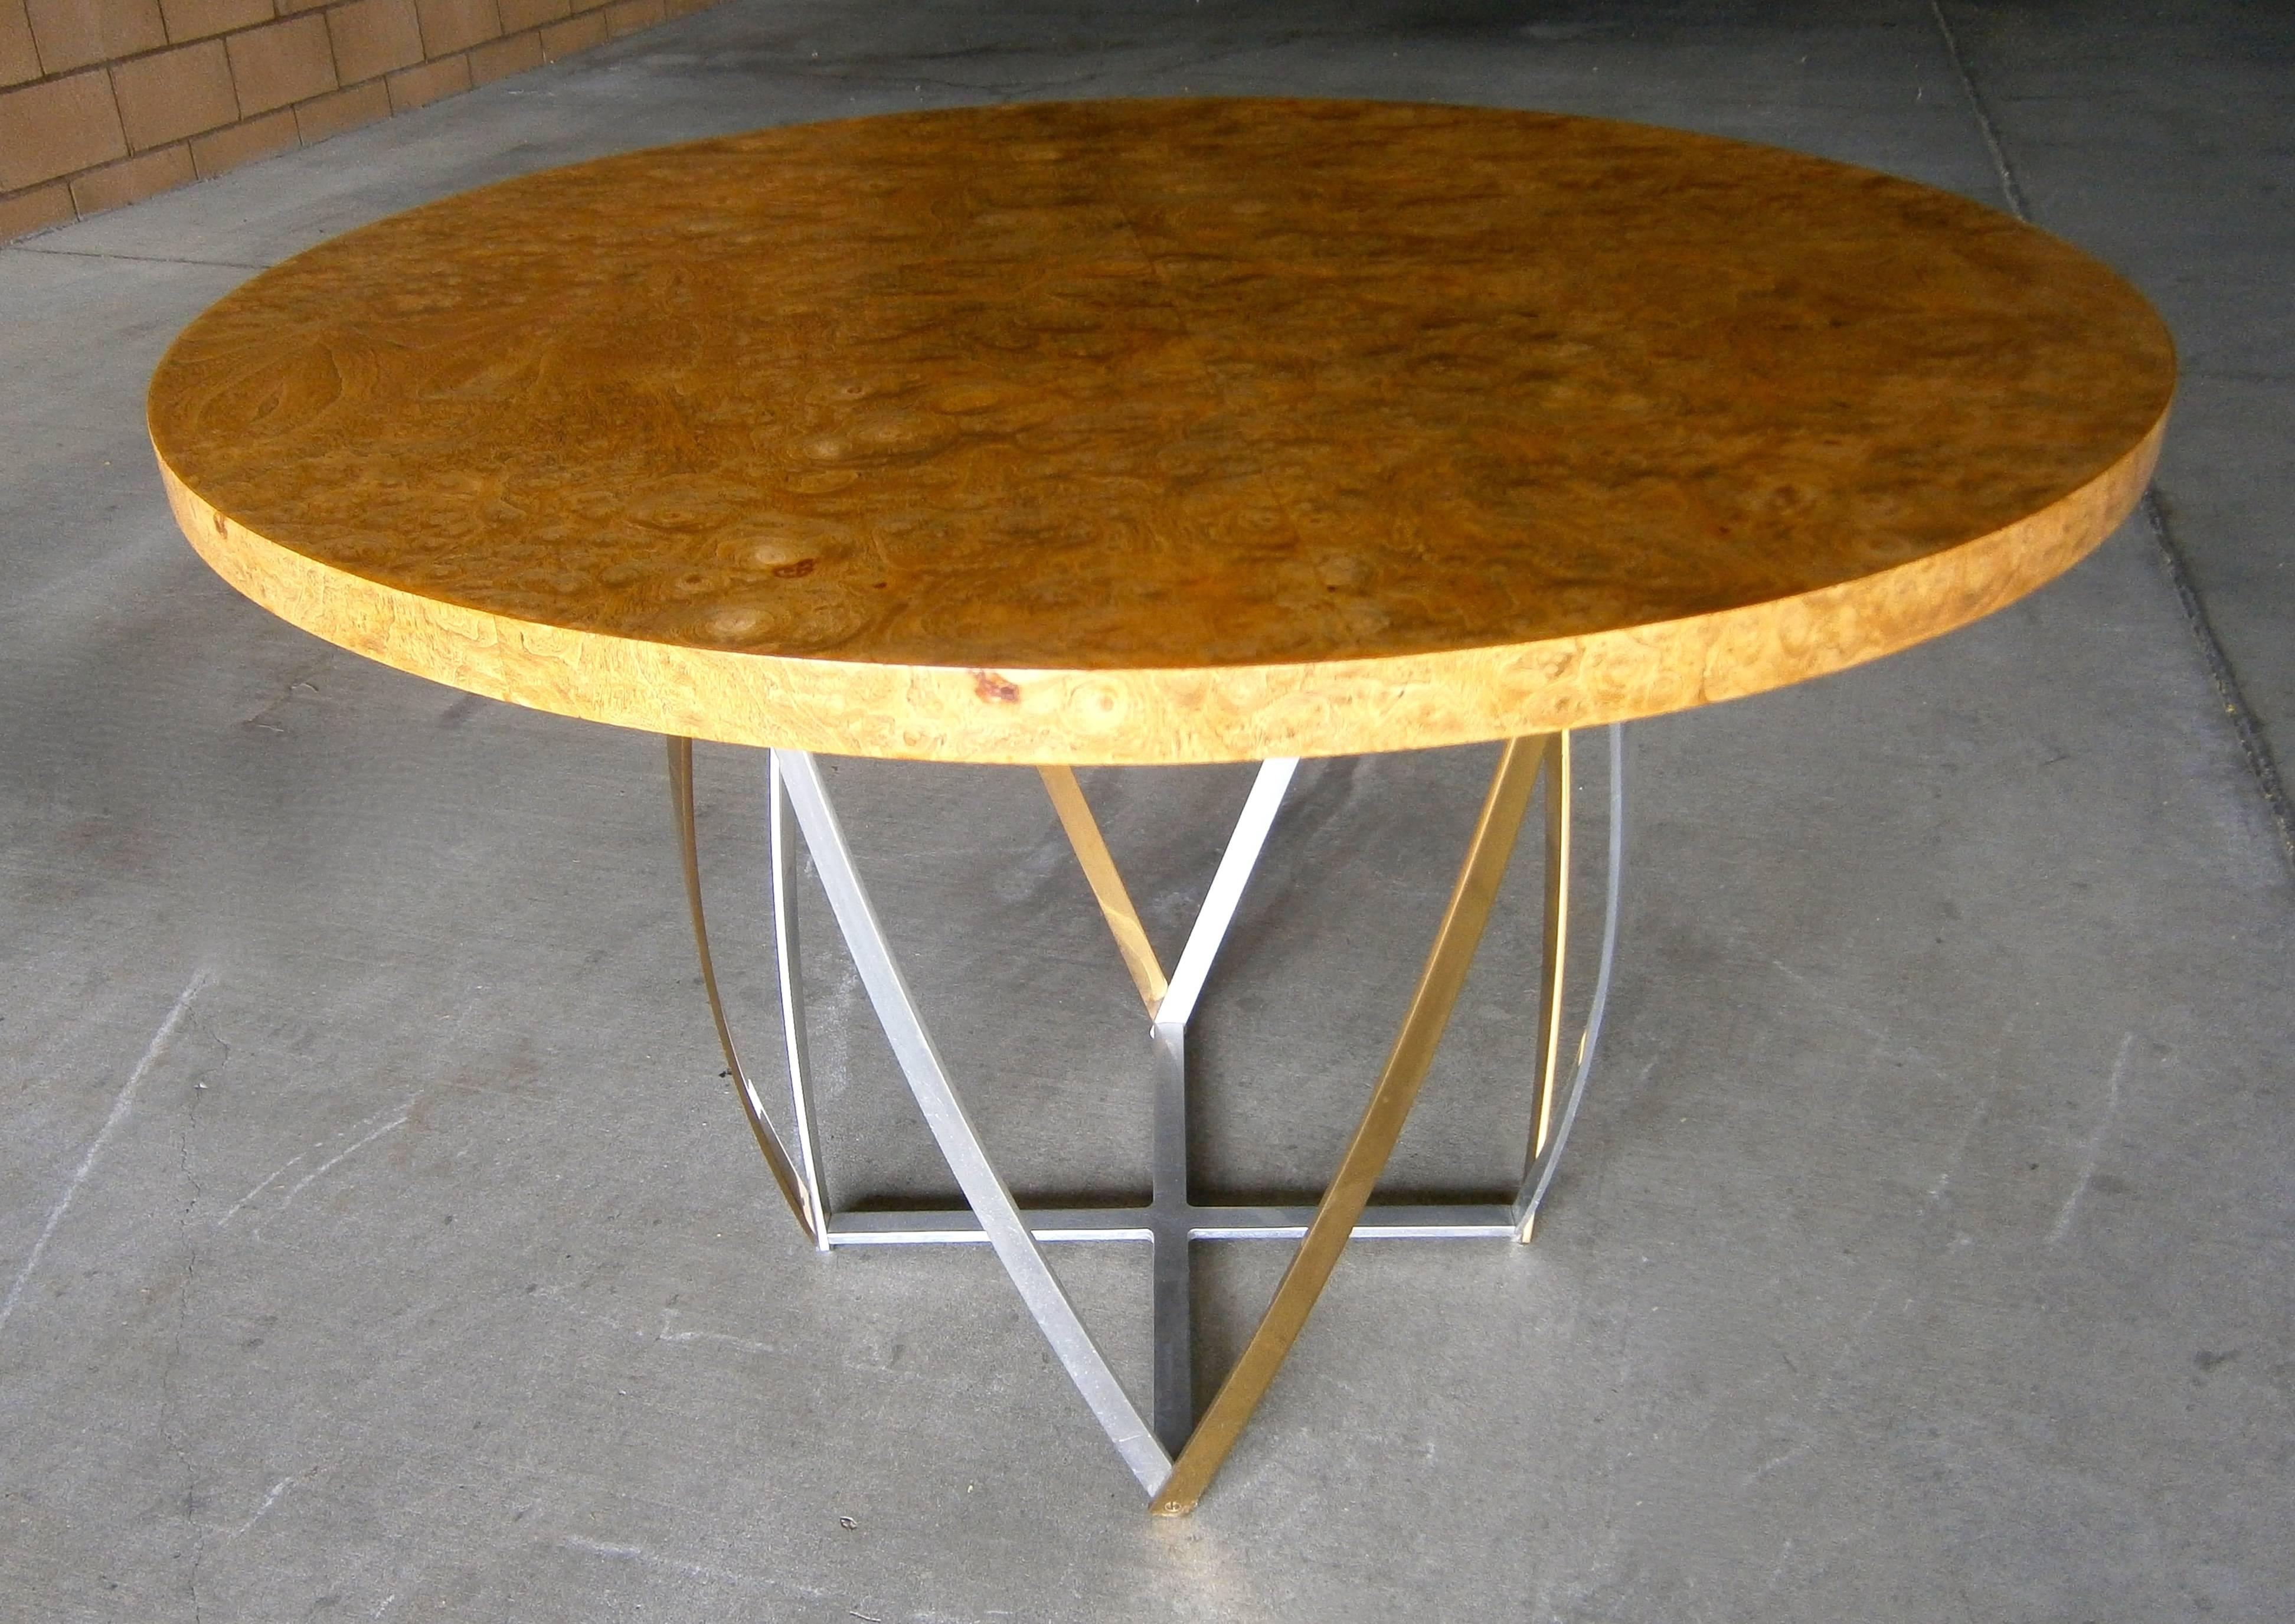 American Aluminum and Brass Based Burled wood Circular Table by John Vesey  C. 1960s For Sale